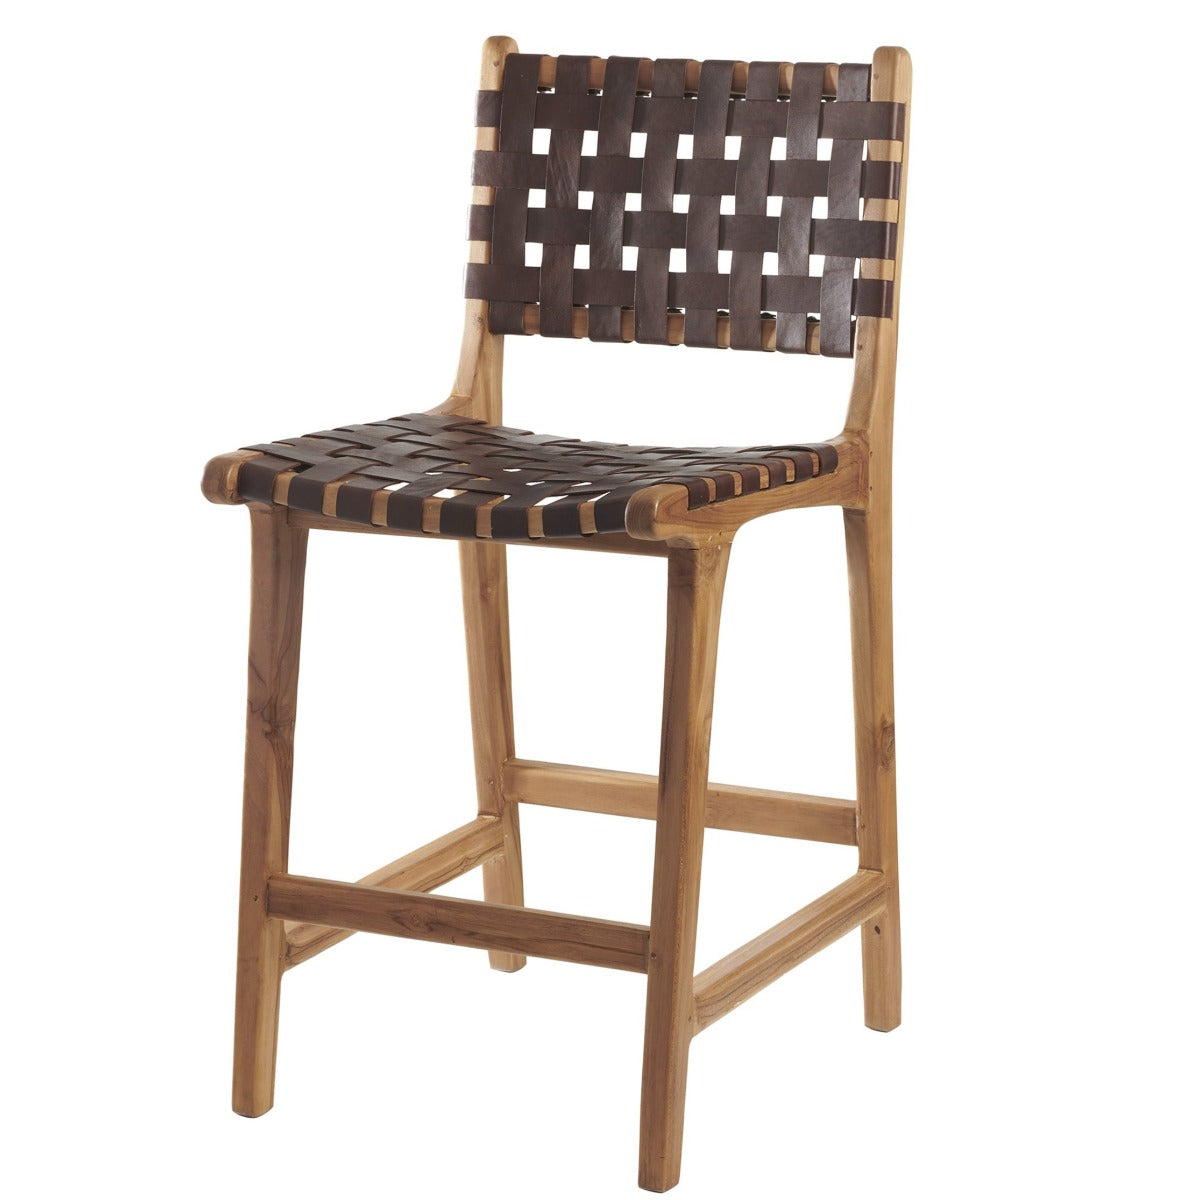 Woven Leather Counter Stool